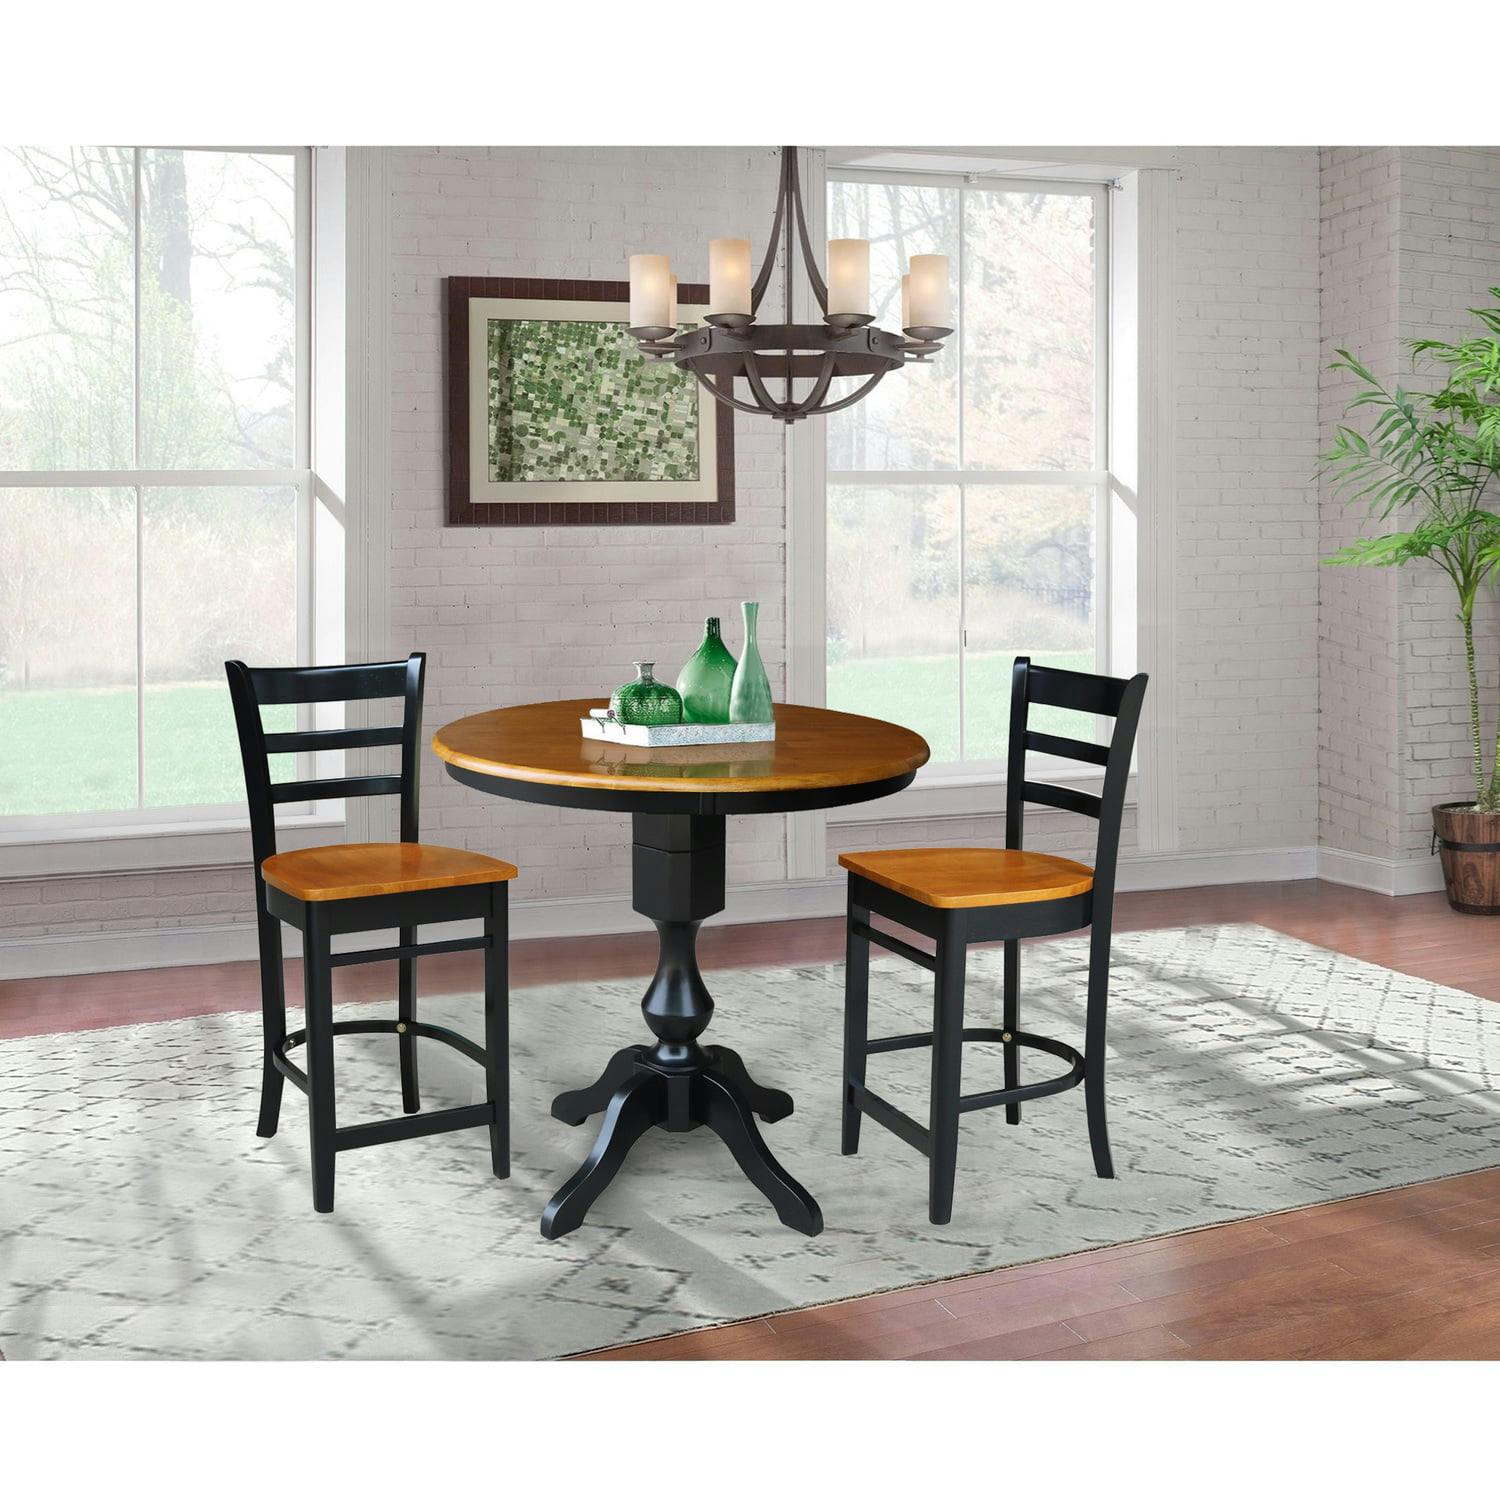 Elegant 36" Black/Cherry Solid Wood Pedestal Counter Height Dining Set with 2 Stools